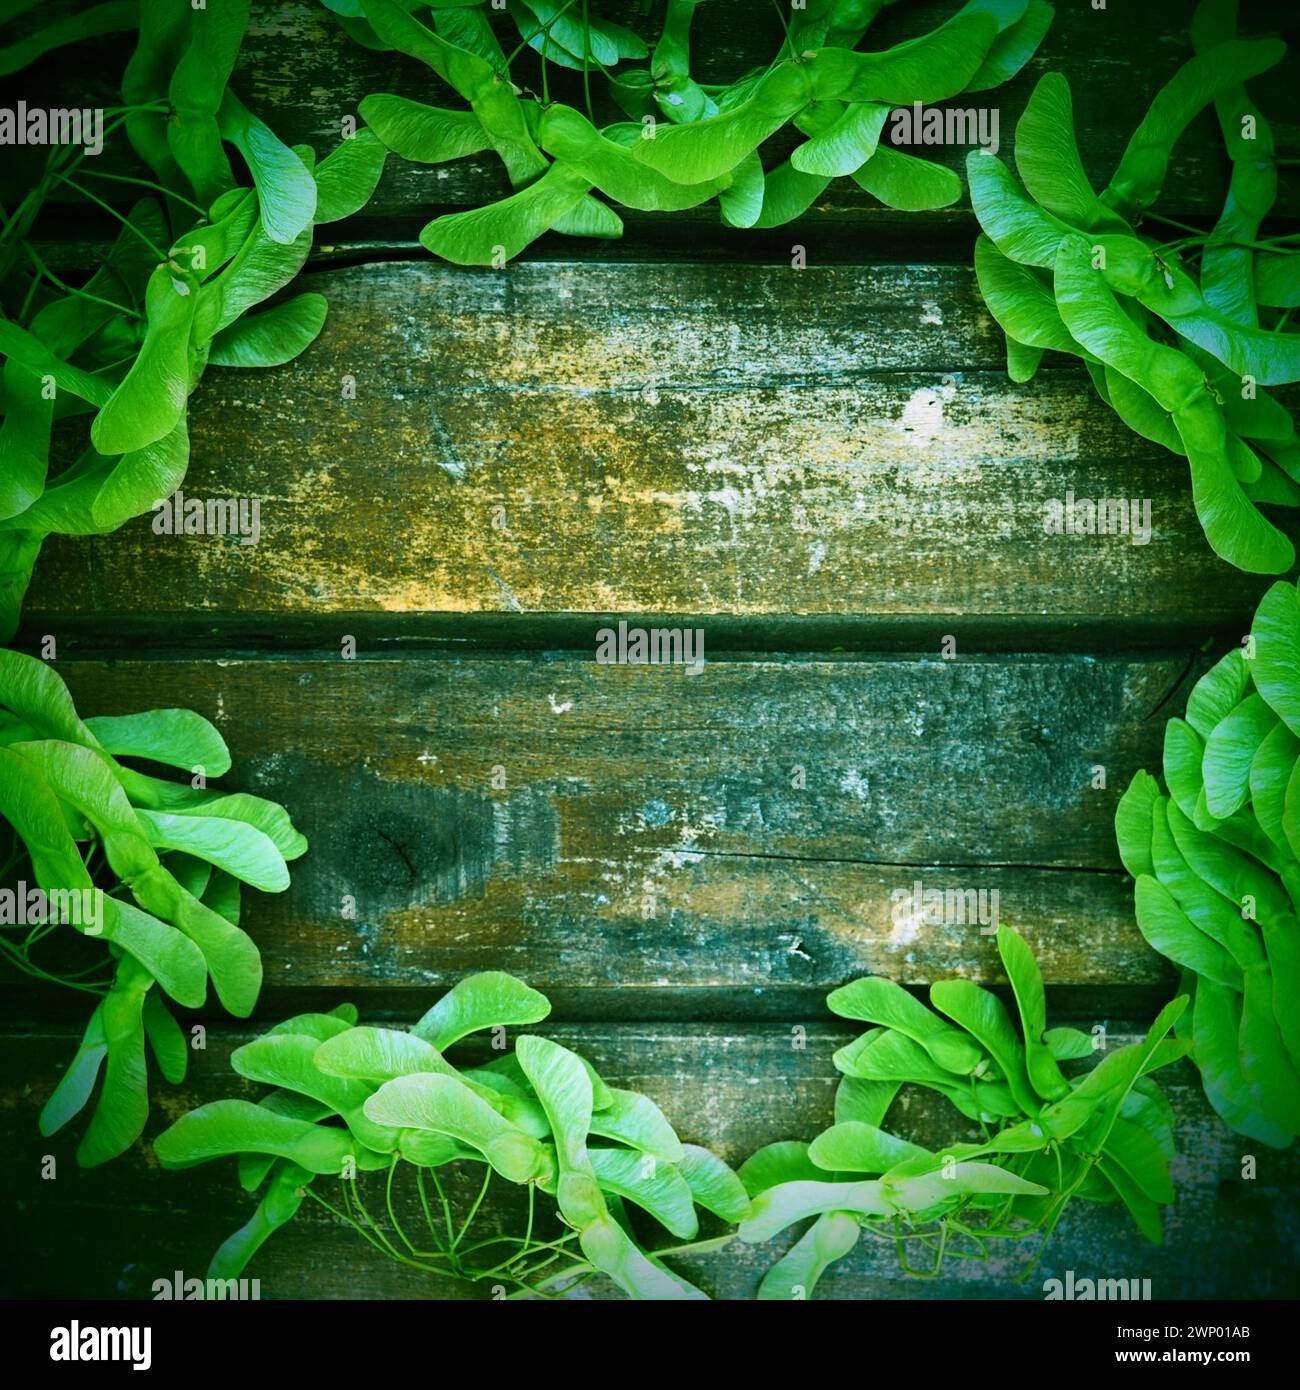 Green maple seeds along the edges of a wooden background made of horizontal planks. Frame or blank for text. Free space for text. copyspace. flat lay Stock Photo